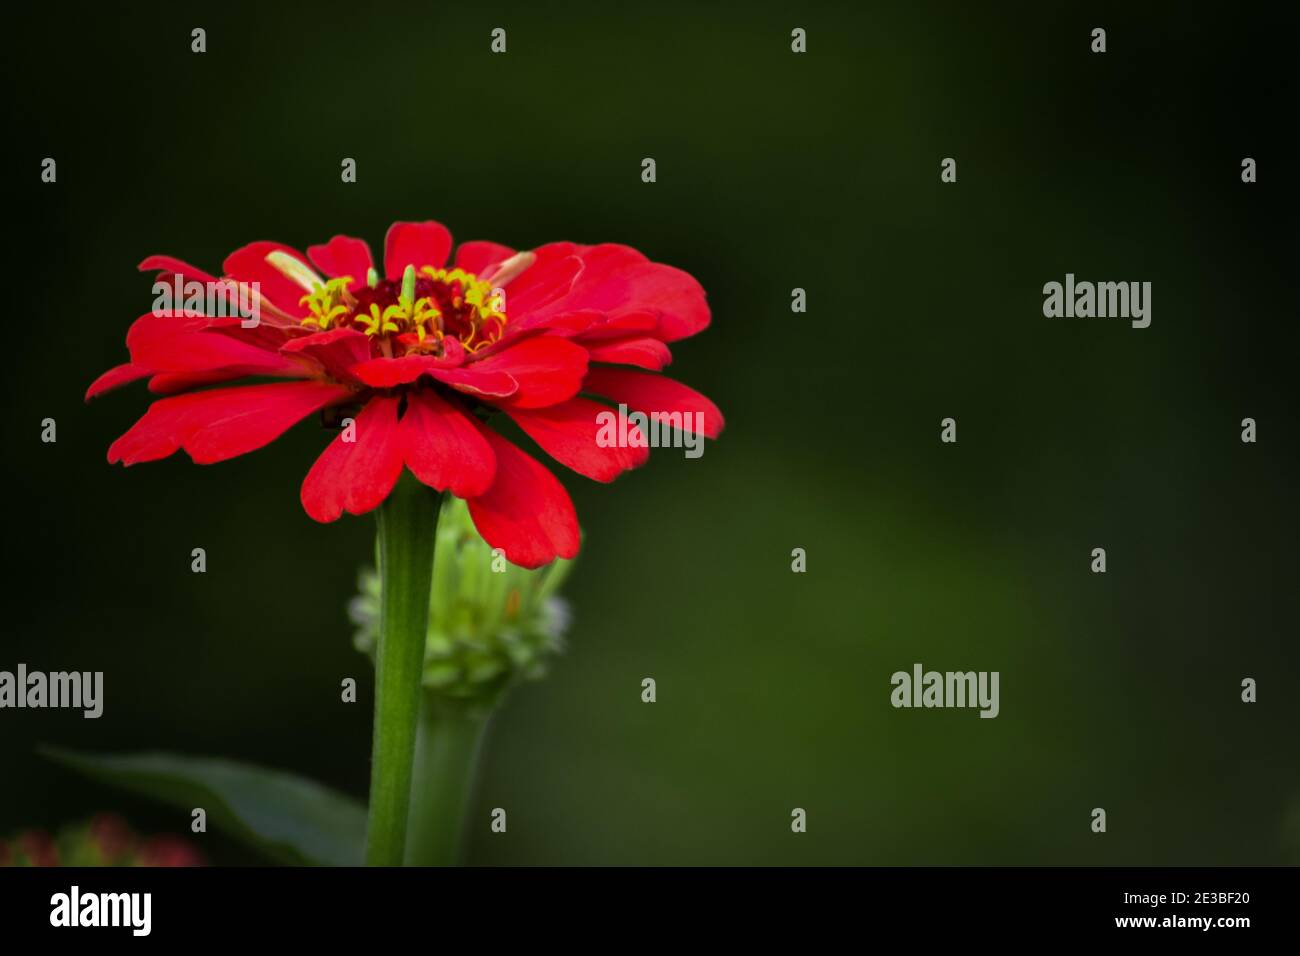 The bright red flowers of zinnia elegans (common zinnia) in the garden closeup Stock Photo